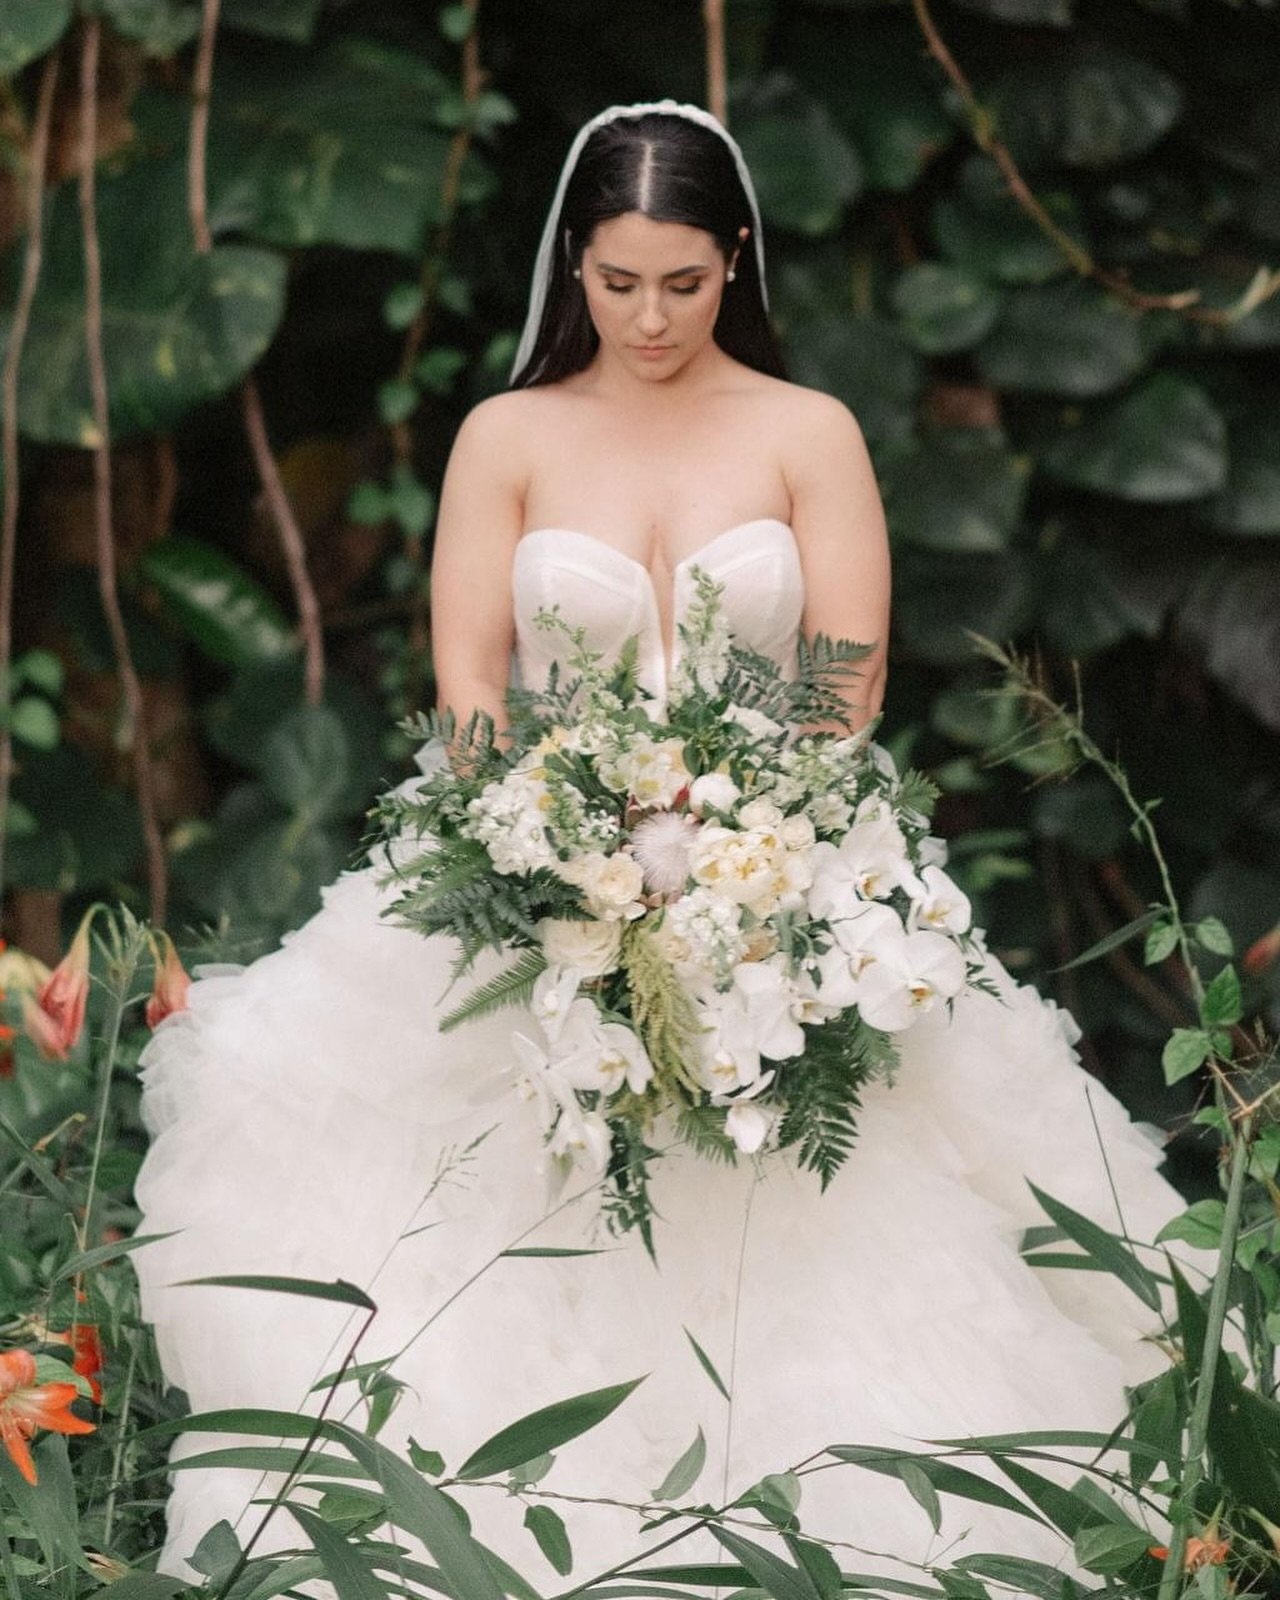 A small wedding does NOT have to mean a small imagination. Be the Bride you always imagined you&rsquo;d get to be, regardless of how small your guest count is. Pick the big beautiful dress, the luscious and full bouquet, and the venue of your dreams.